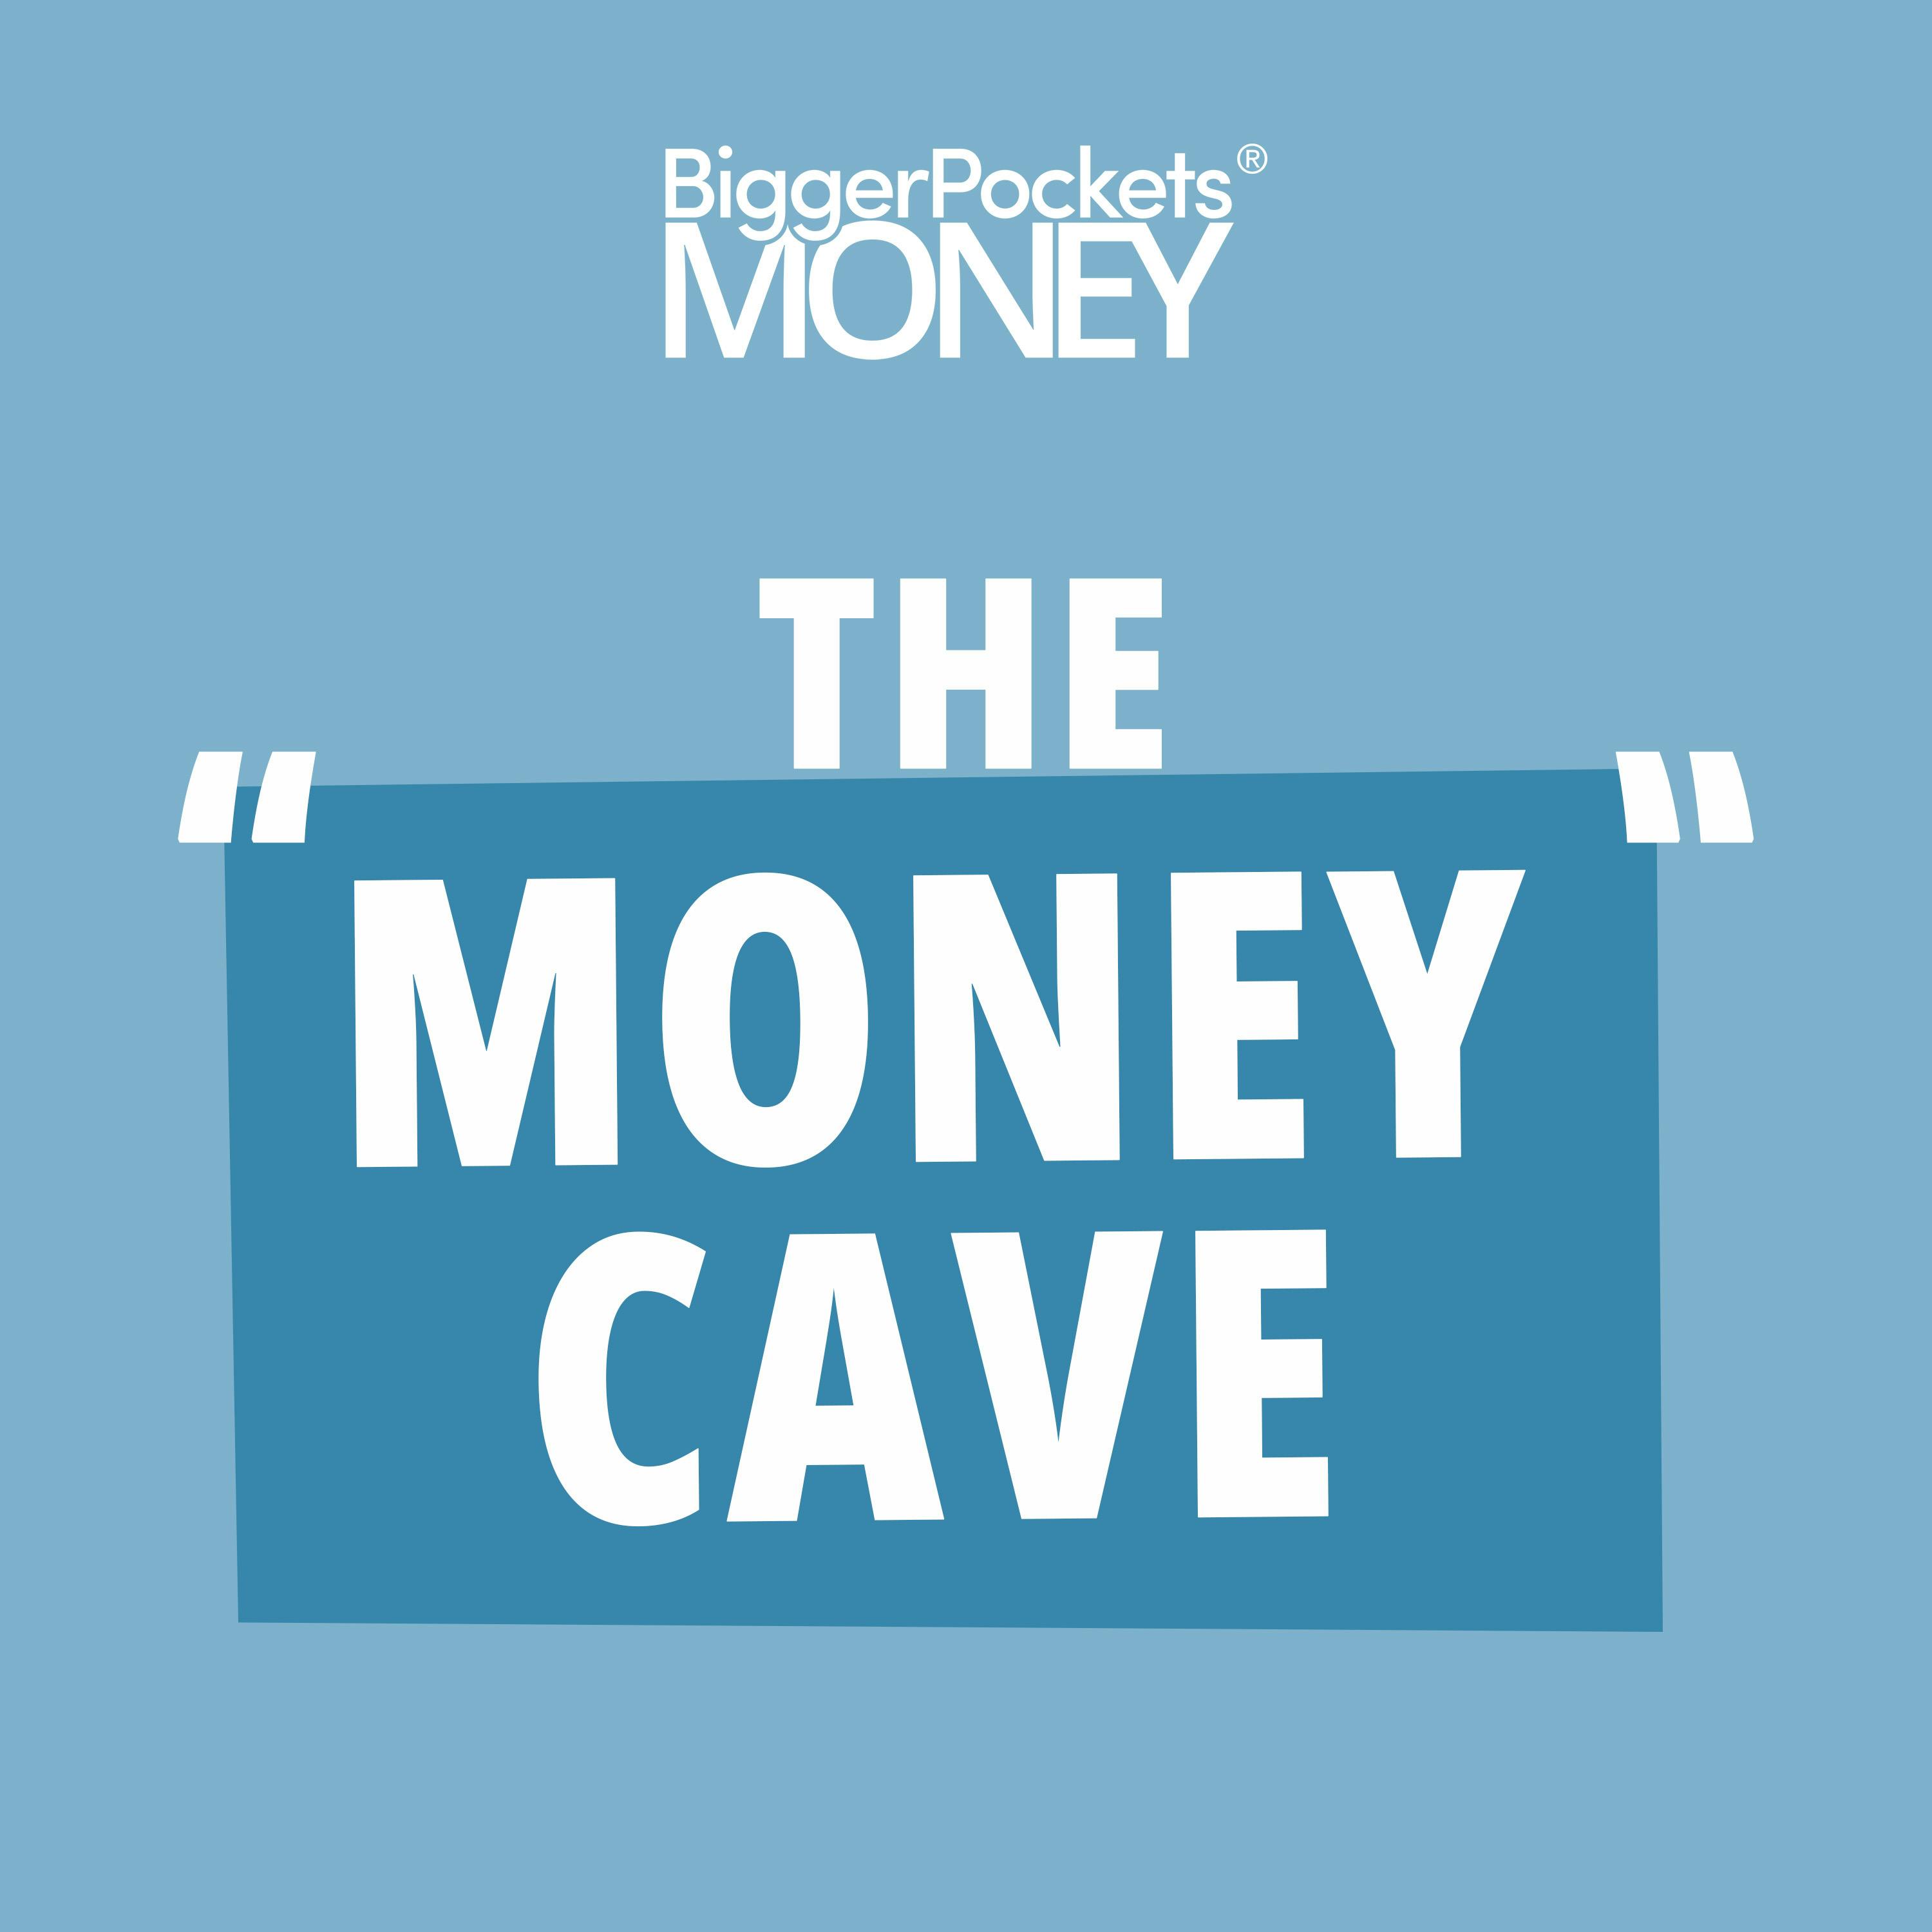 420: Trading His Man Cave for a “Money Cave” That Makes THOUSANDS a Month